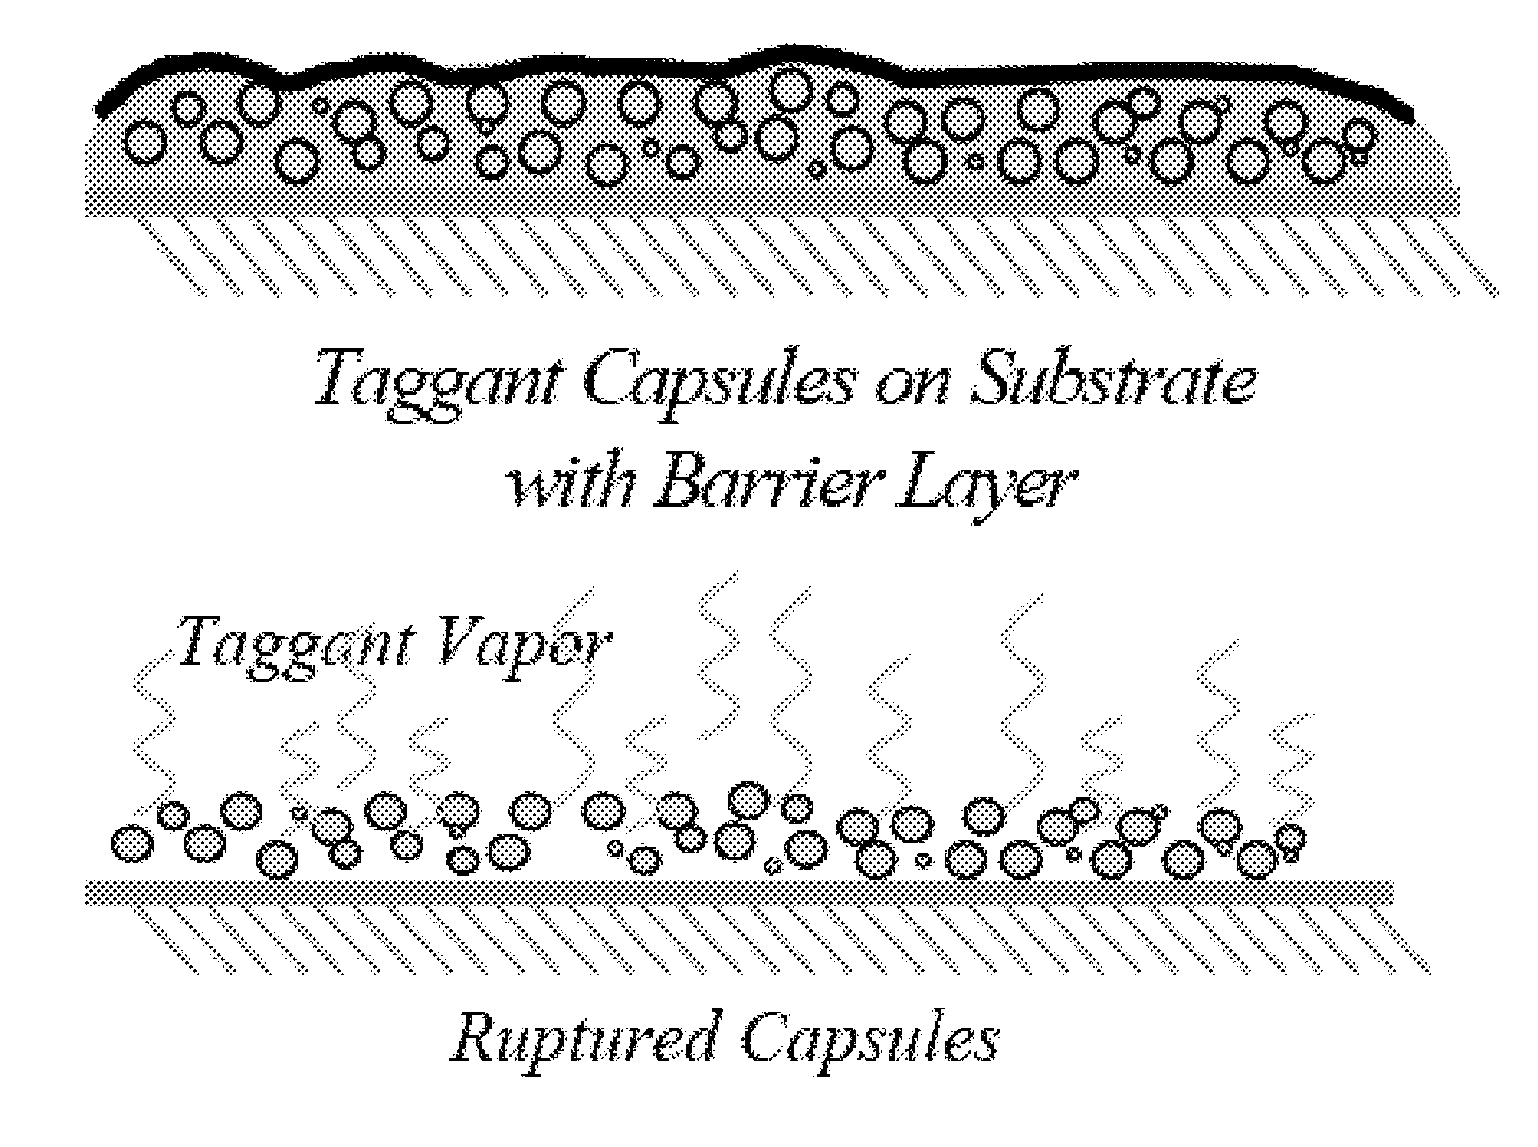 Methods of delivery of encapsulated perfluorocarbon taggants